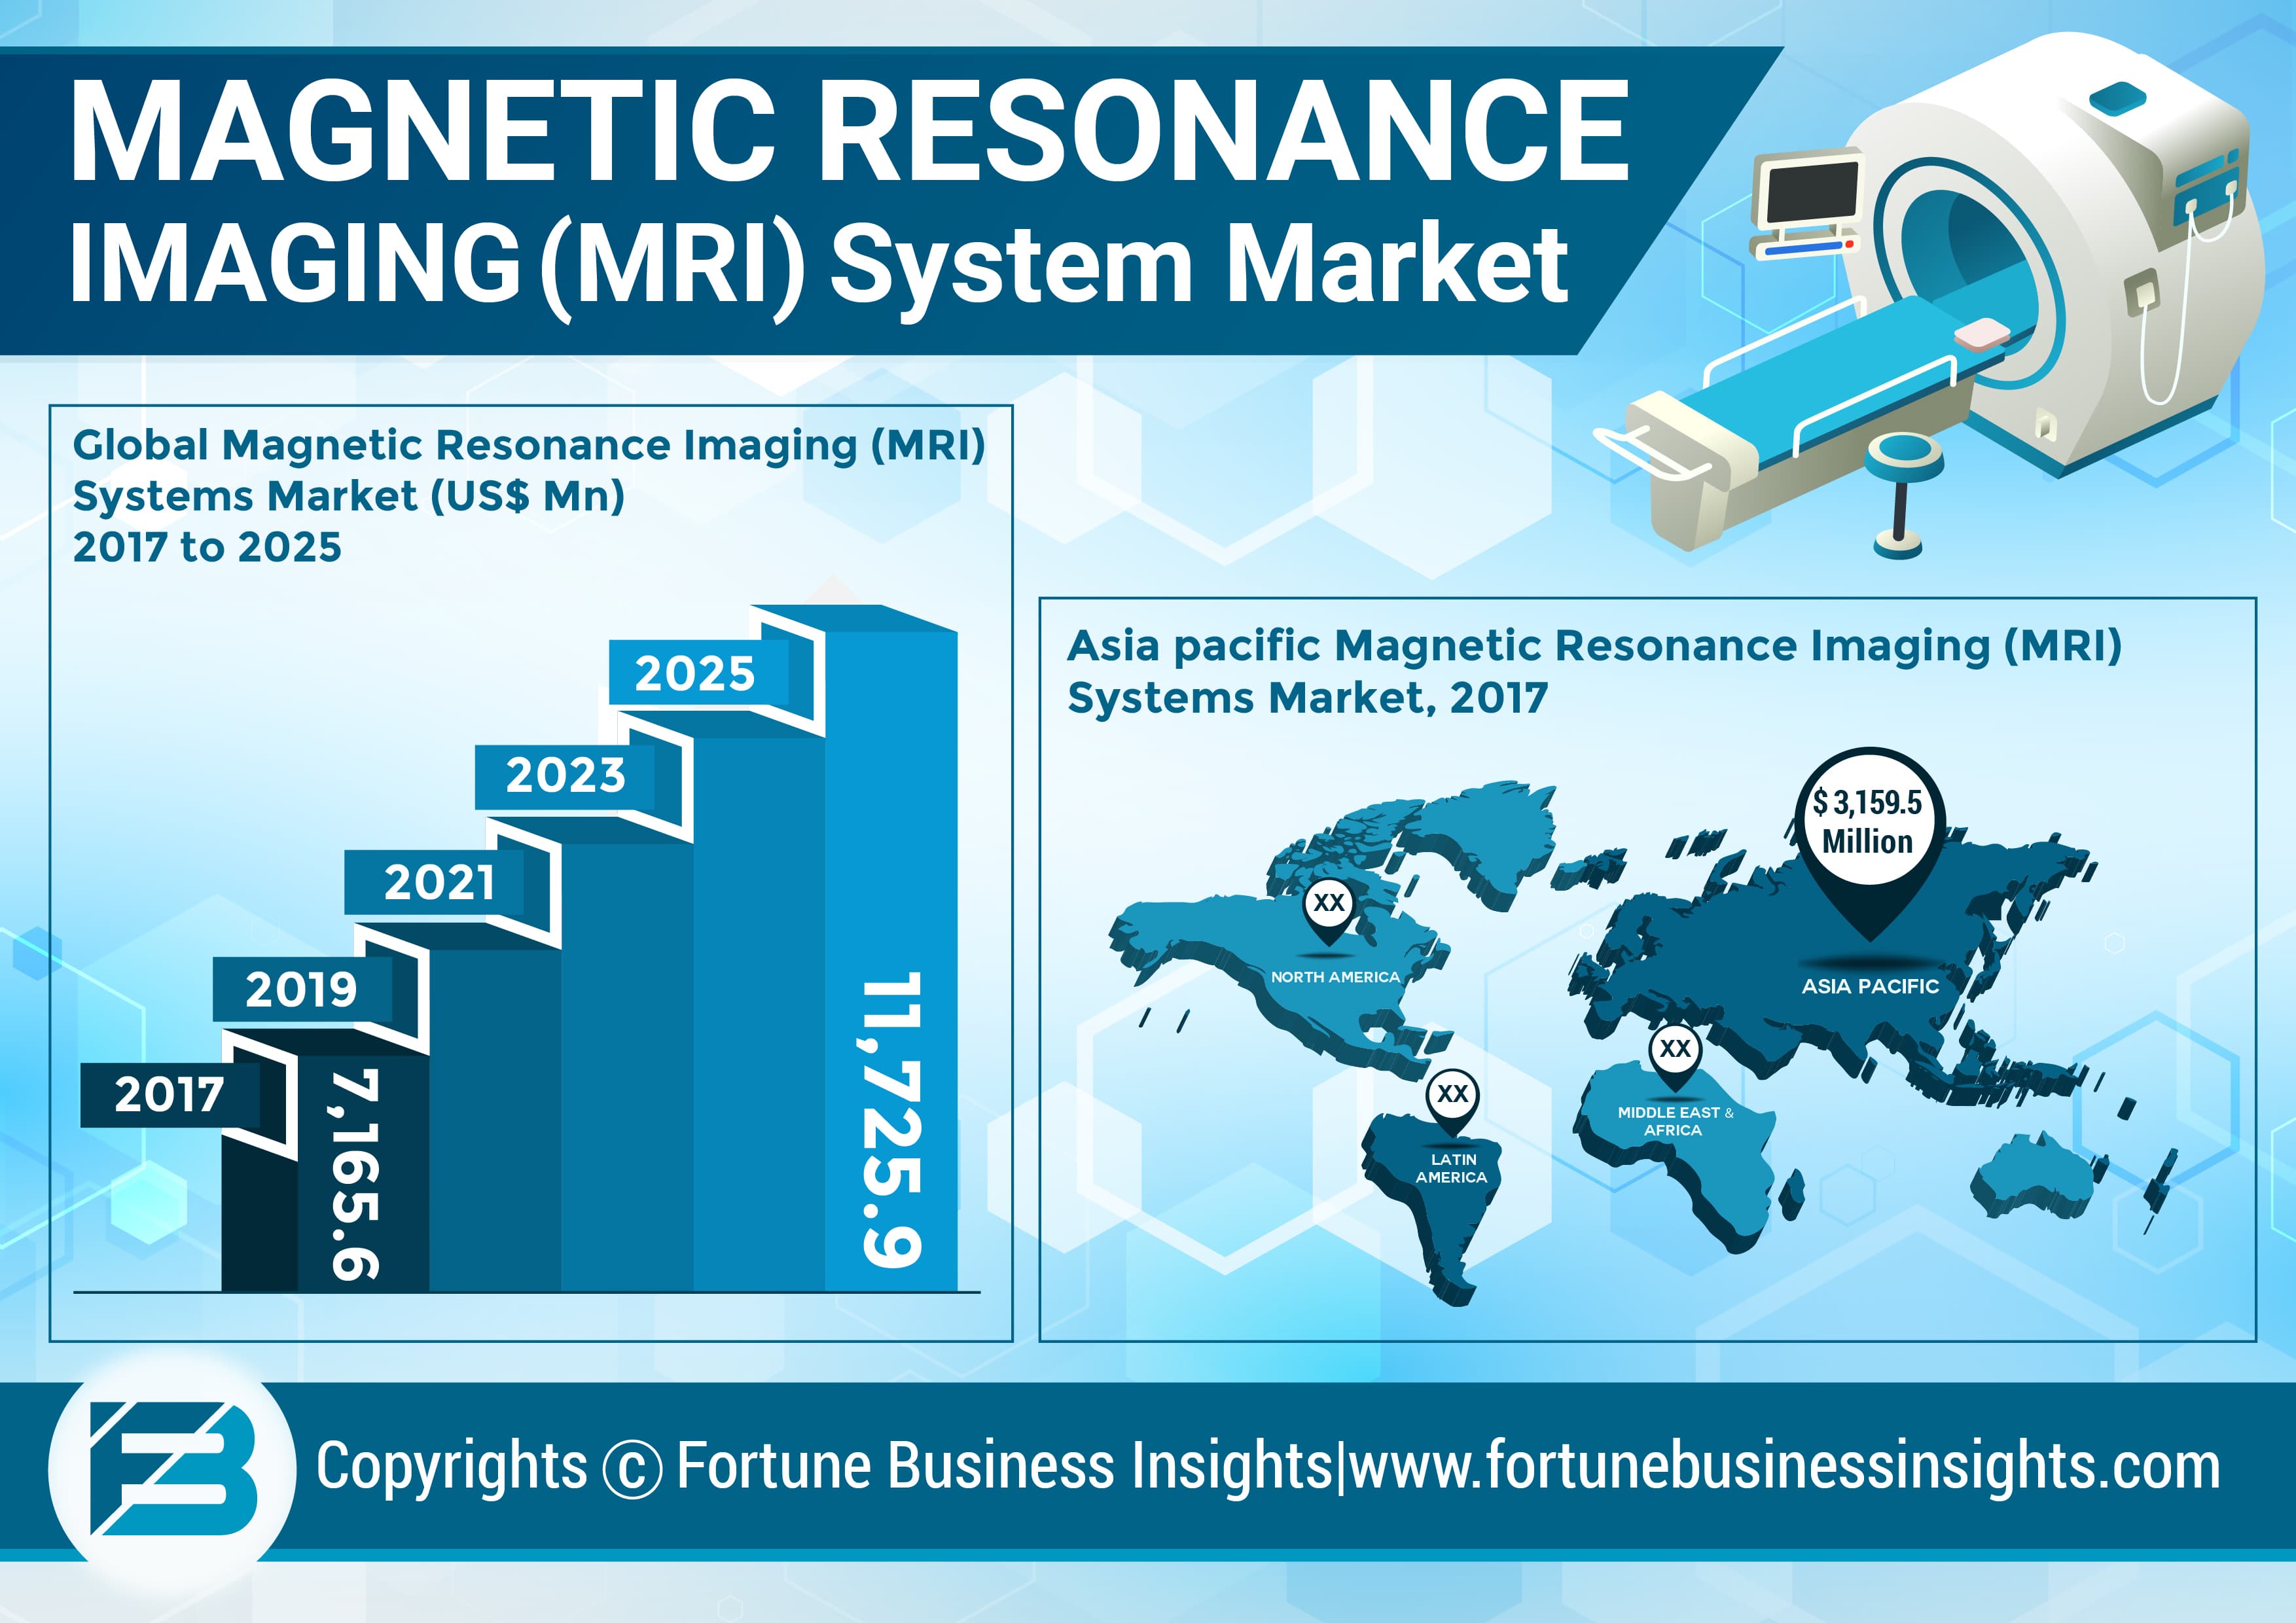 Magnetic Resonance Imaging Market by Size, Share, Report Overview, Industry Trend, Geography Forecast till 2025